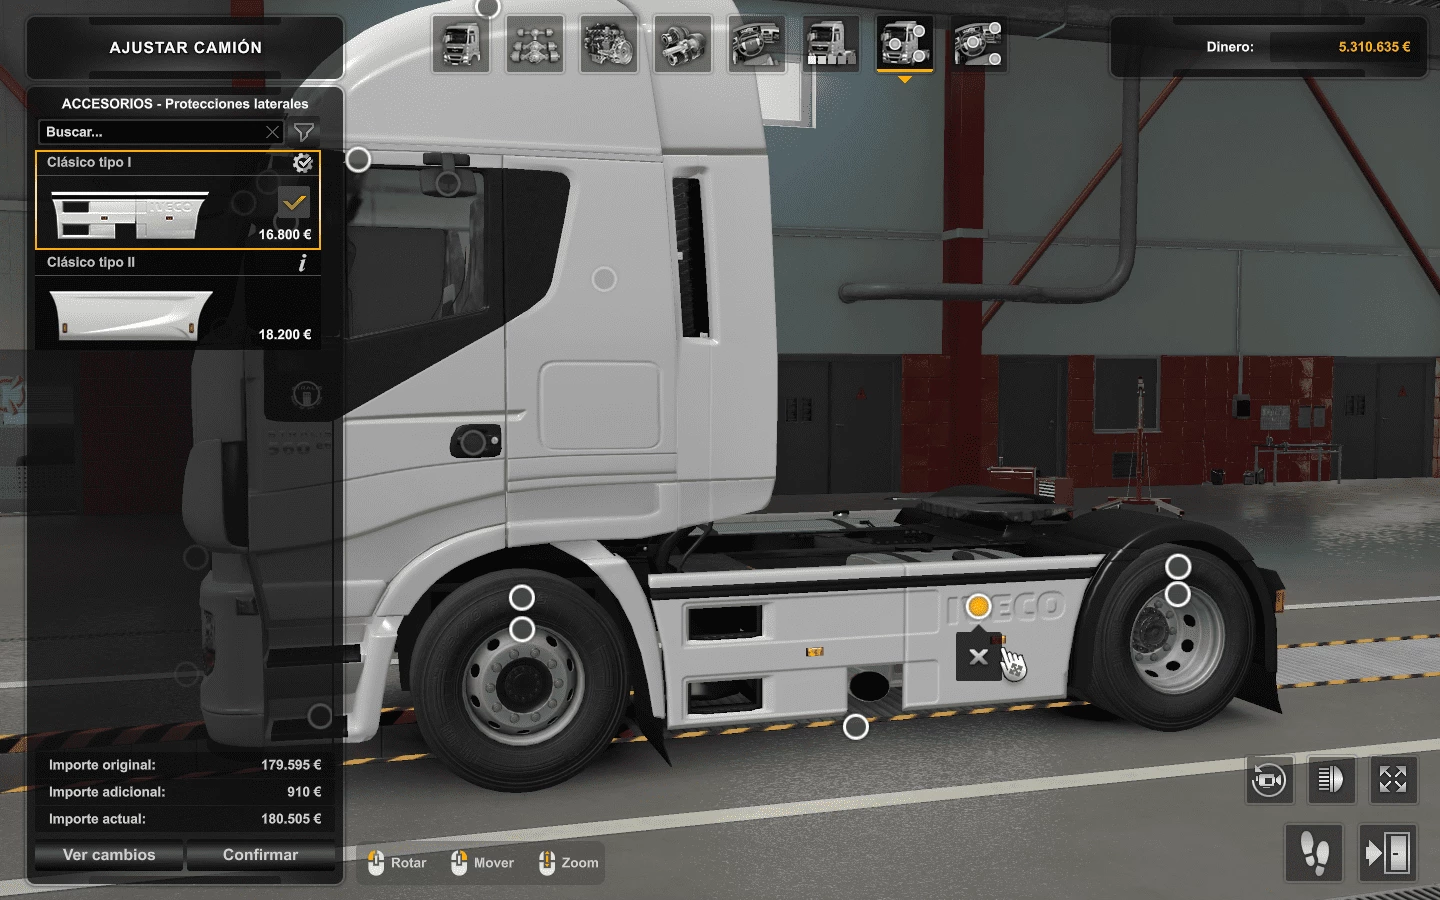 Iveco Hiway No Side Skirt + Exhausts Without Them MP-SP TruckersMP 1.49.x